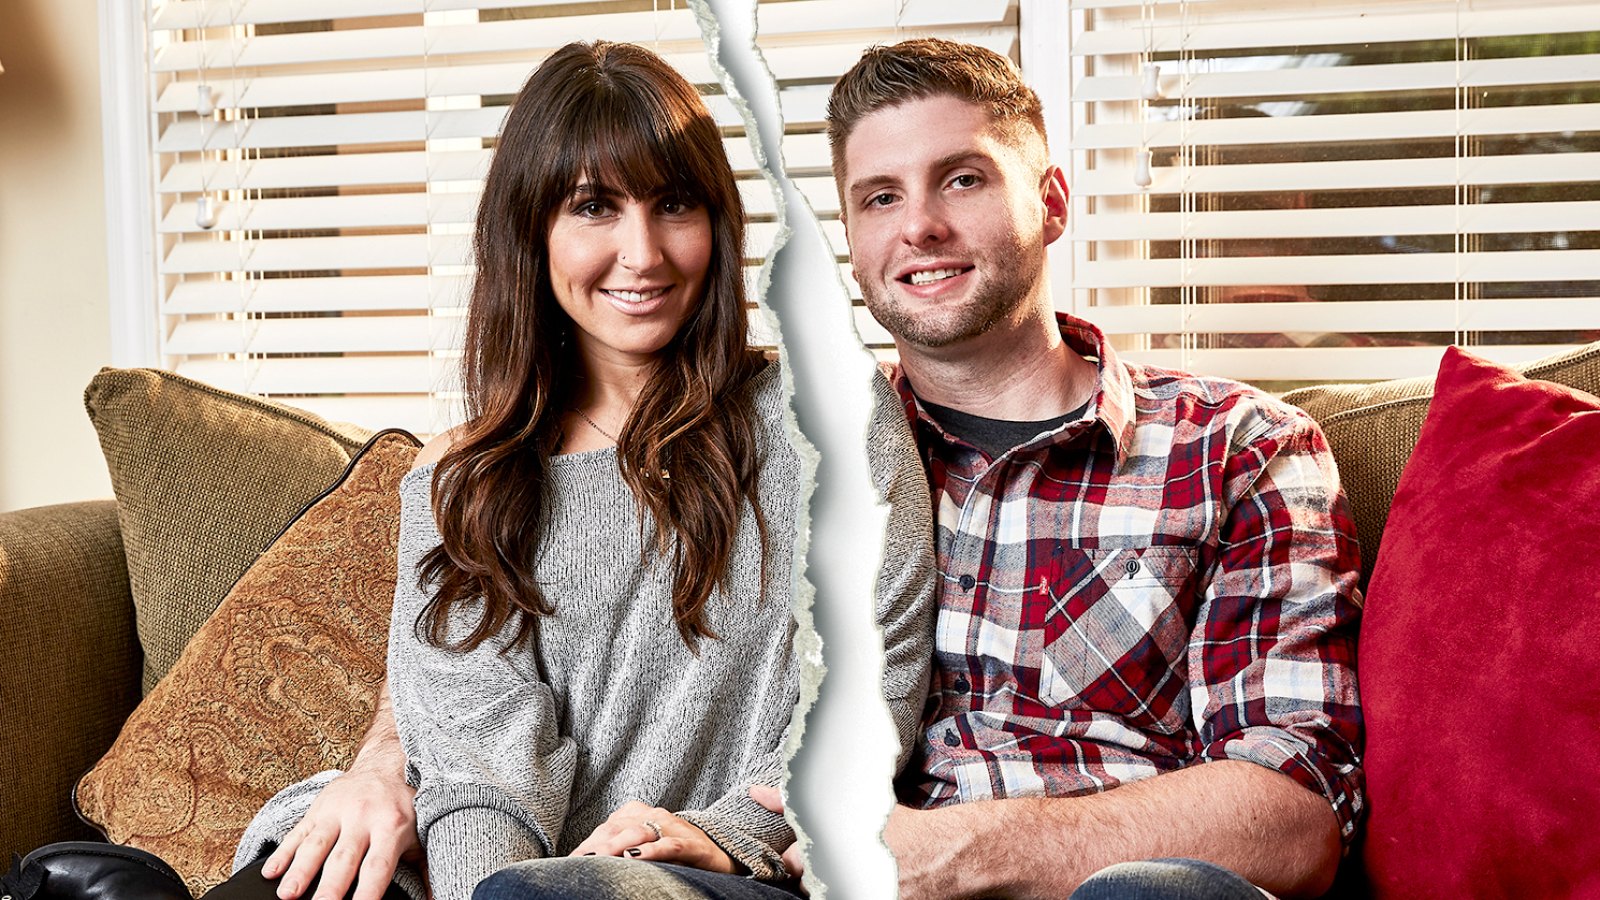 Married at First Sight’s Danielle DeGroot and Cody Knapek